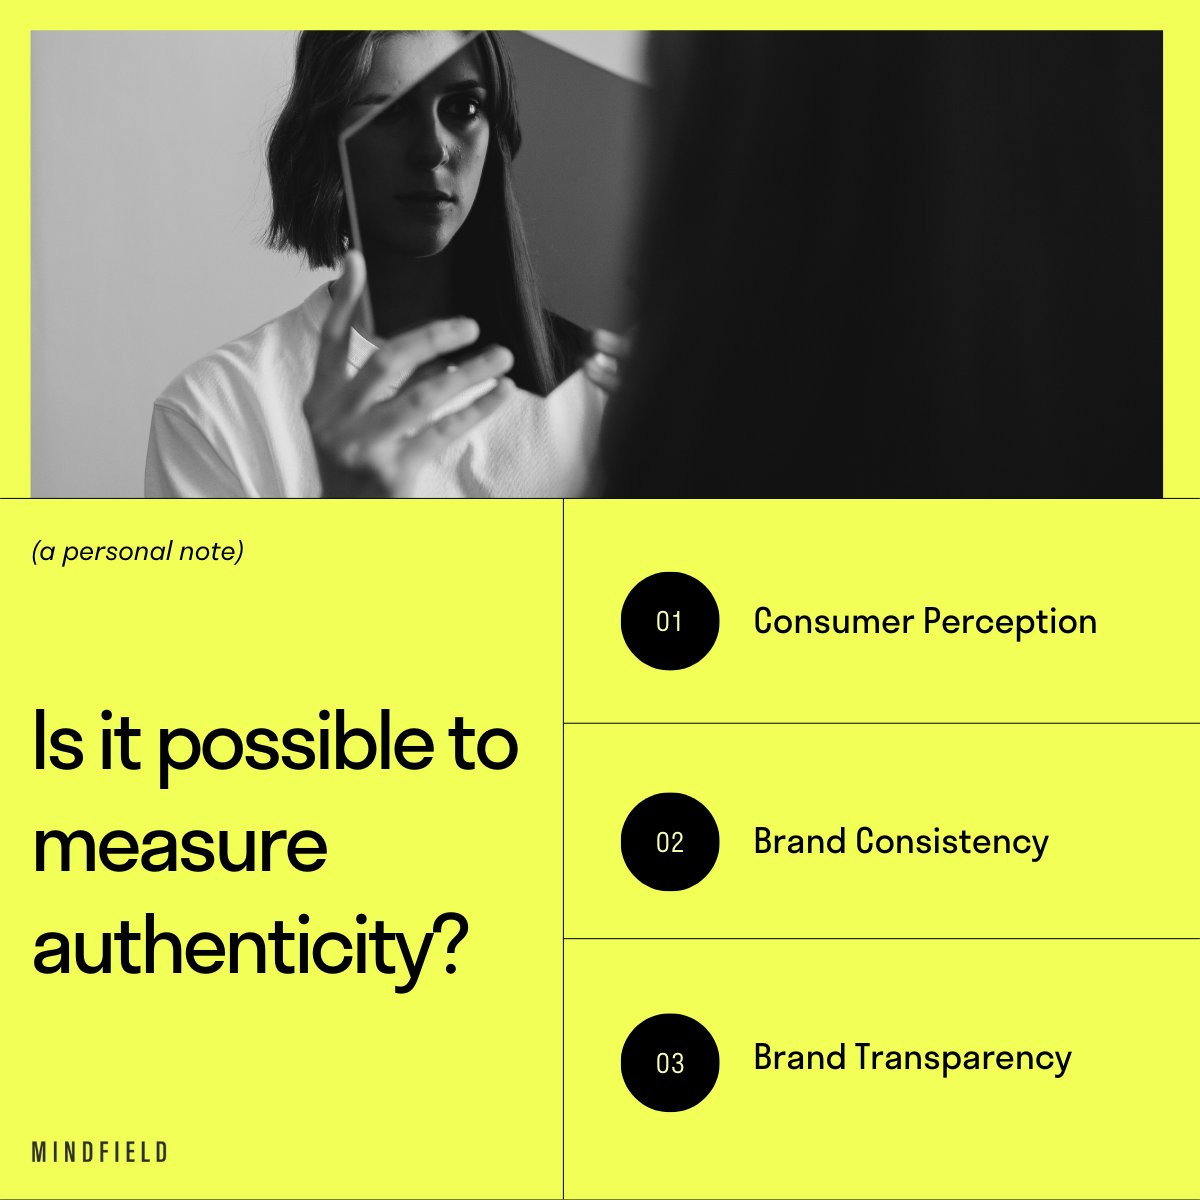 Authenticity has emerged as a crucial concept in brand strategy, particularly now, where consumers are increasingly discerning and seek genuine connections with the brands they support. This aspect is highly valued, and the question becomes increasingly relevant. #mindfield